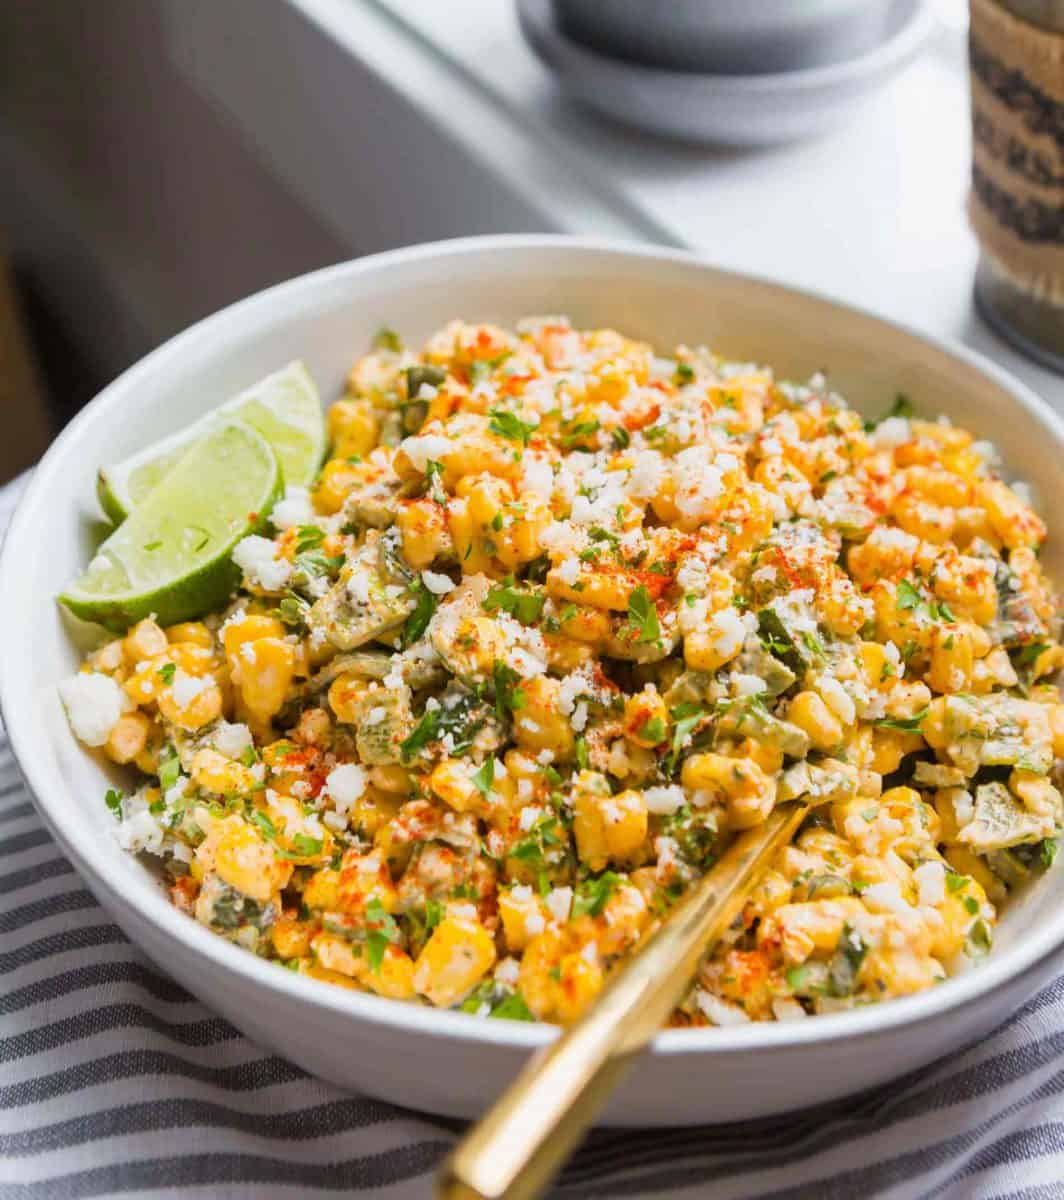 A different take on the original Mexican street corn off the cob. This poblano Mexican street corn off the cob is extra creamy, smoky, and flavorful! #mexicancorn #corn #cornrecipes #offthecob